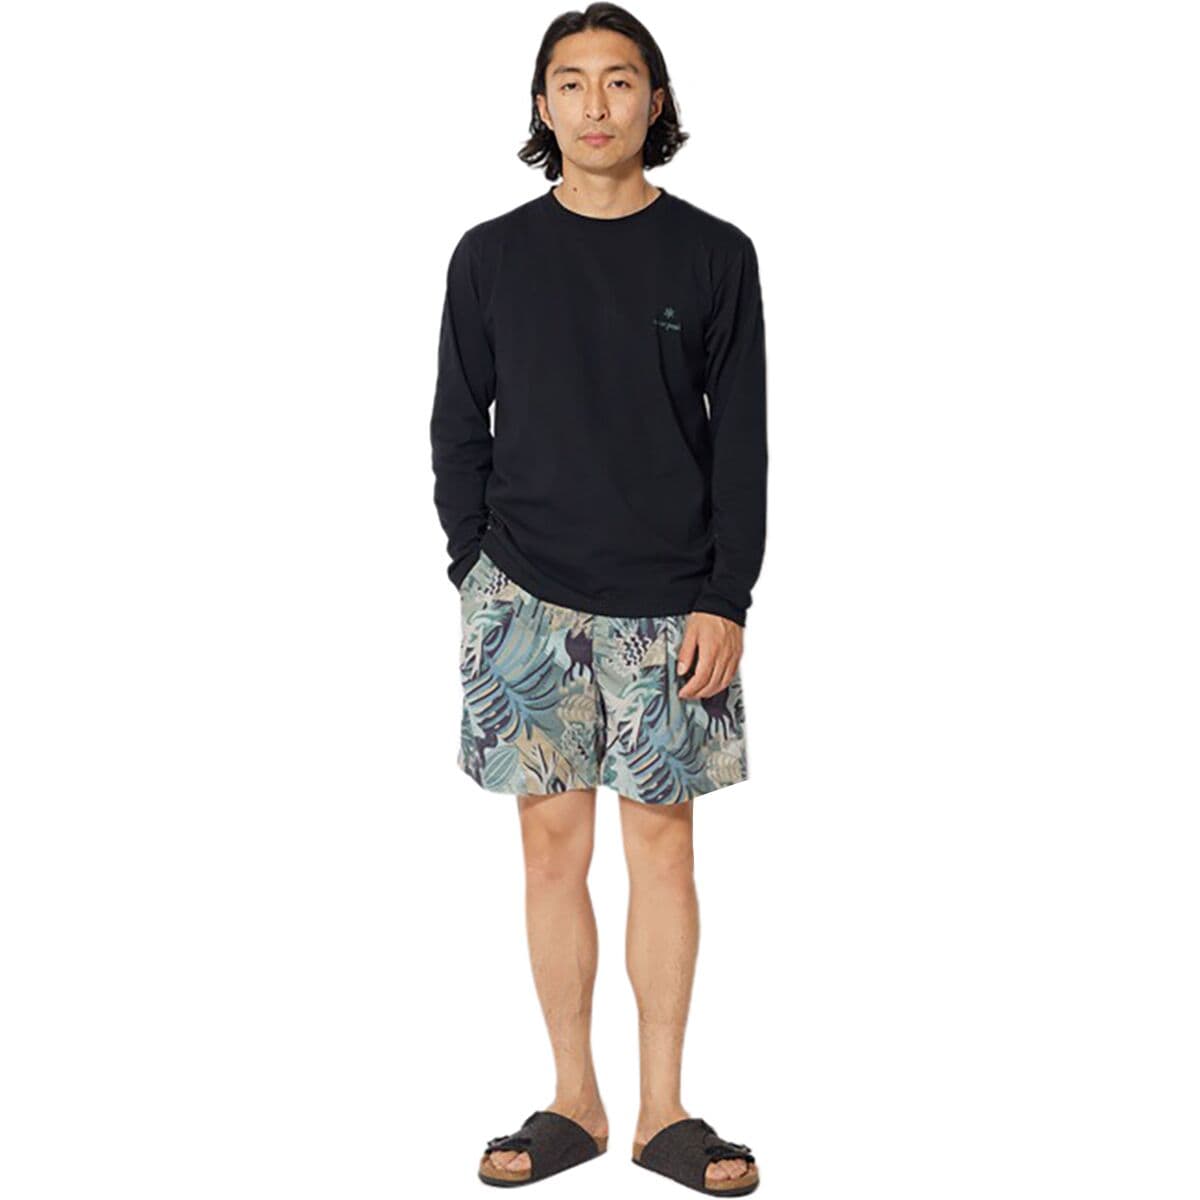 Snow Peak Printed Breathable Quick Dry Shorts - Men's - Clothing